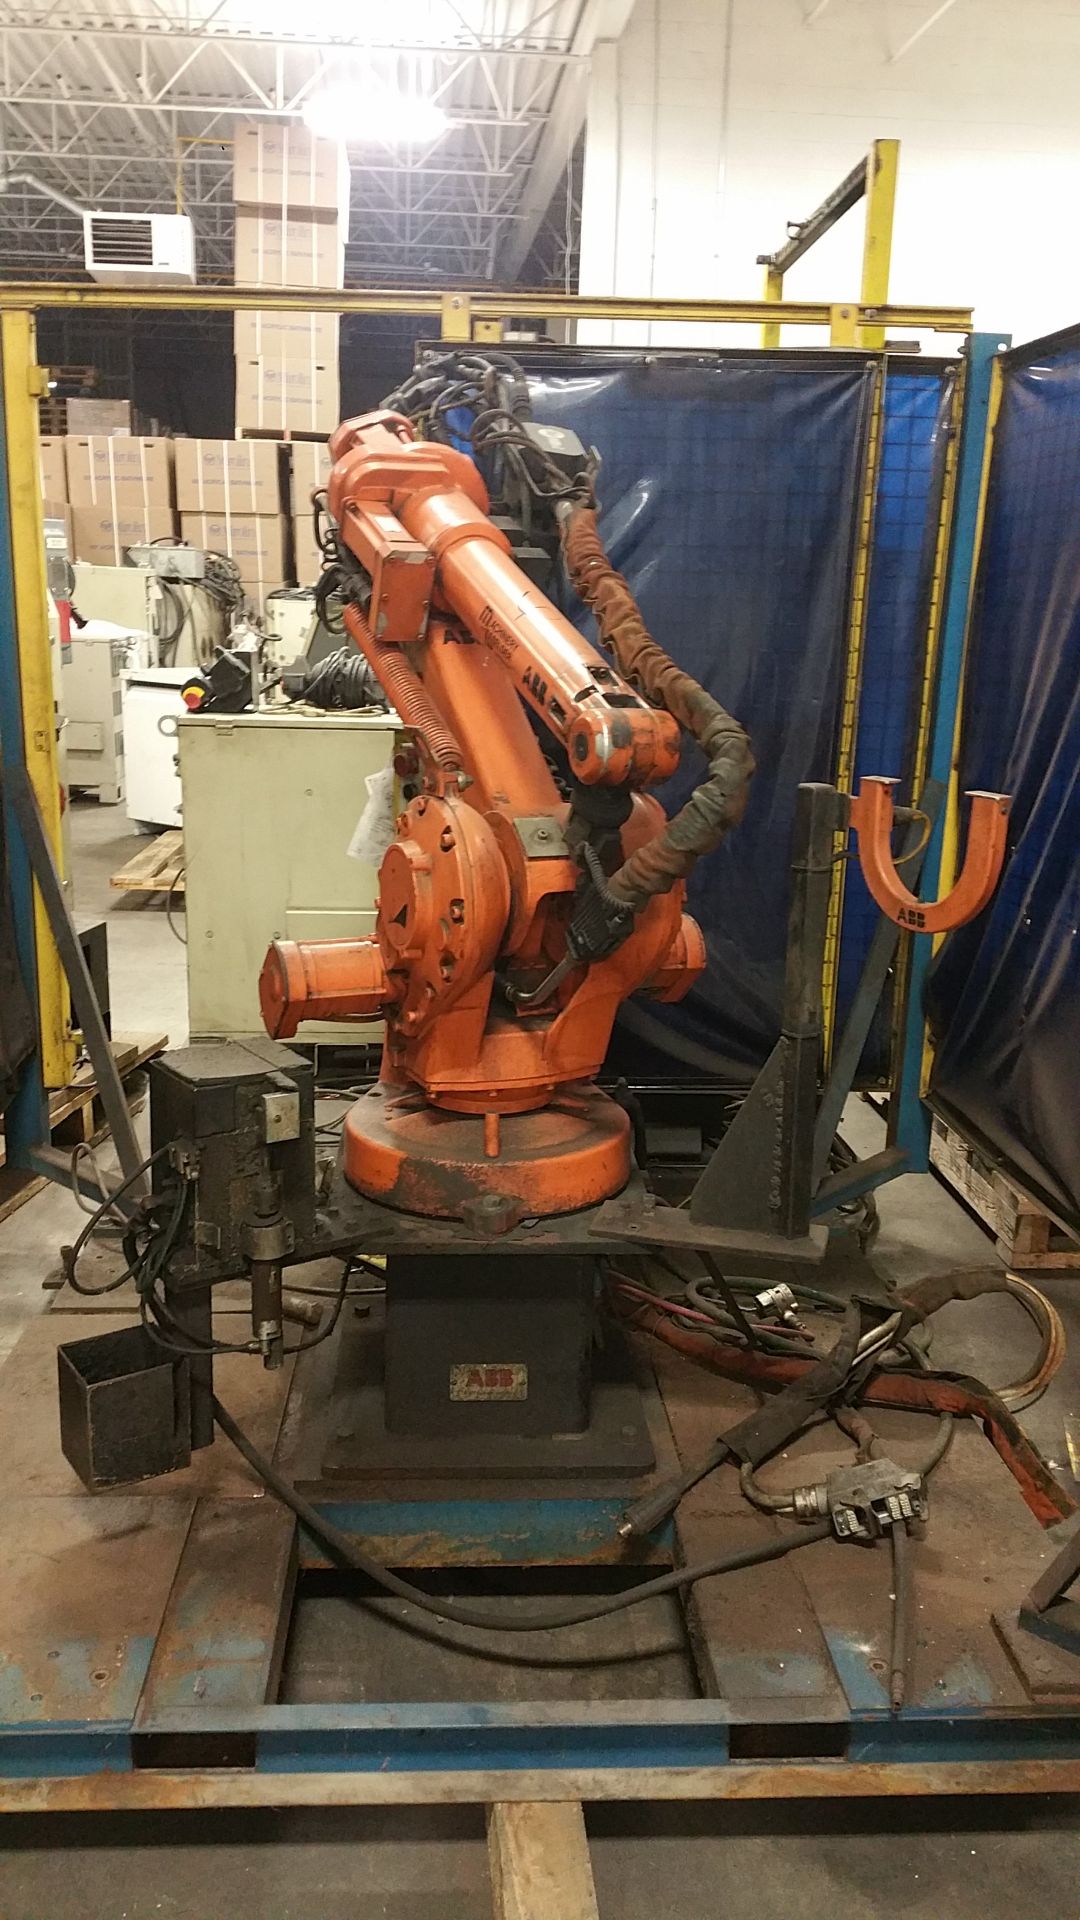 AUTOMATED WELDING CELL, MACHINERY & WELDER CORP WITH ABB IRB 1400 M98 60 AXIS WELDING ROBOT